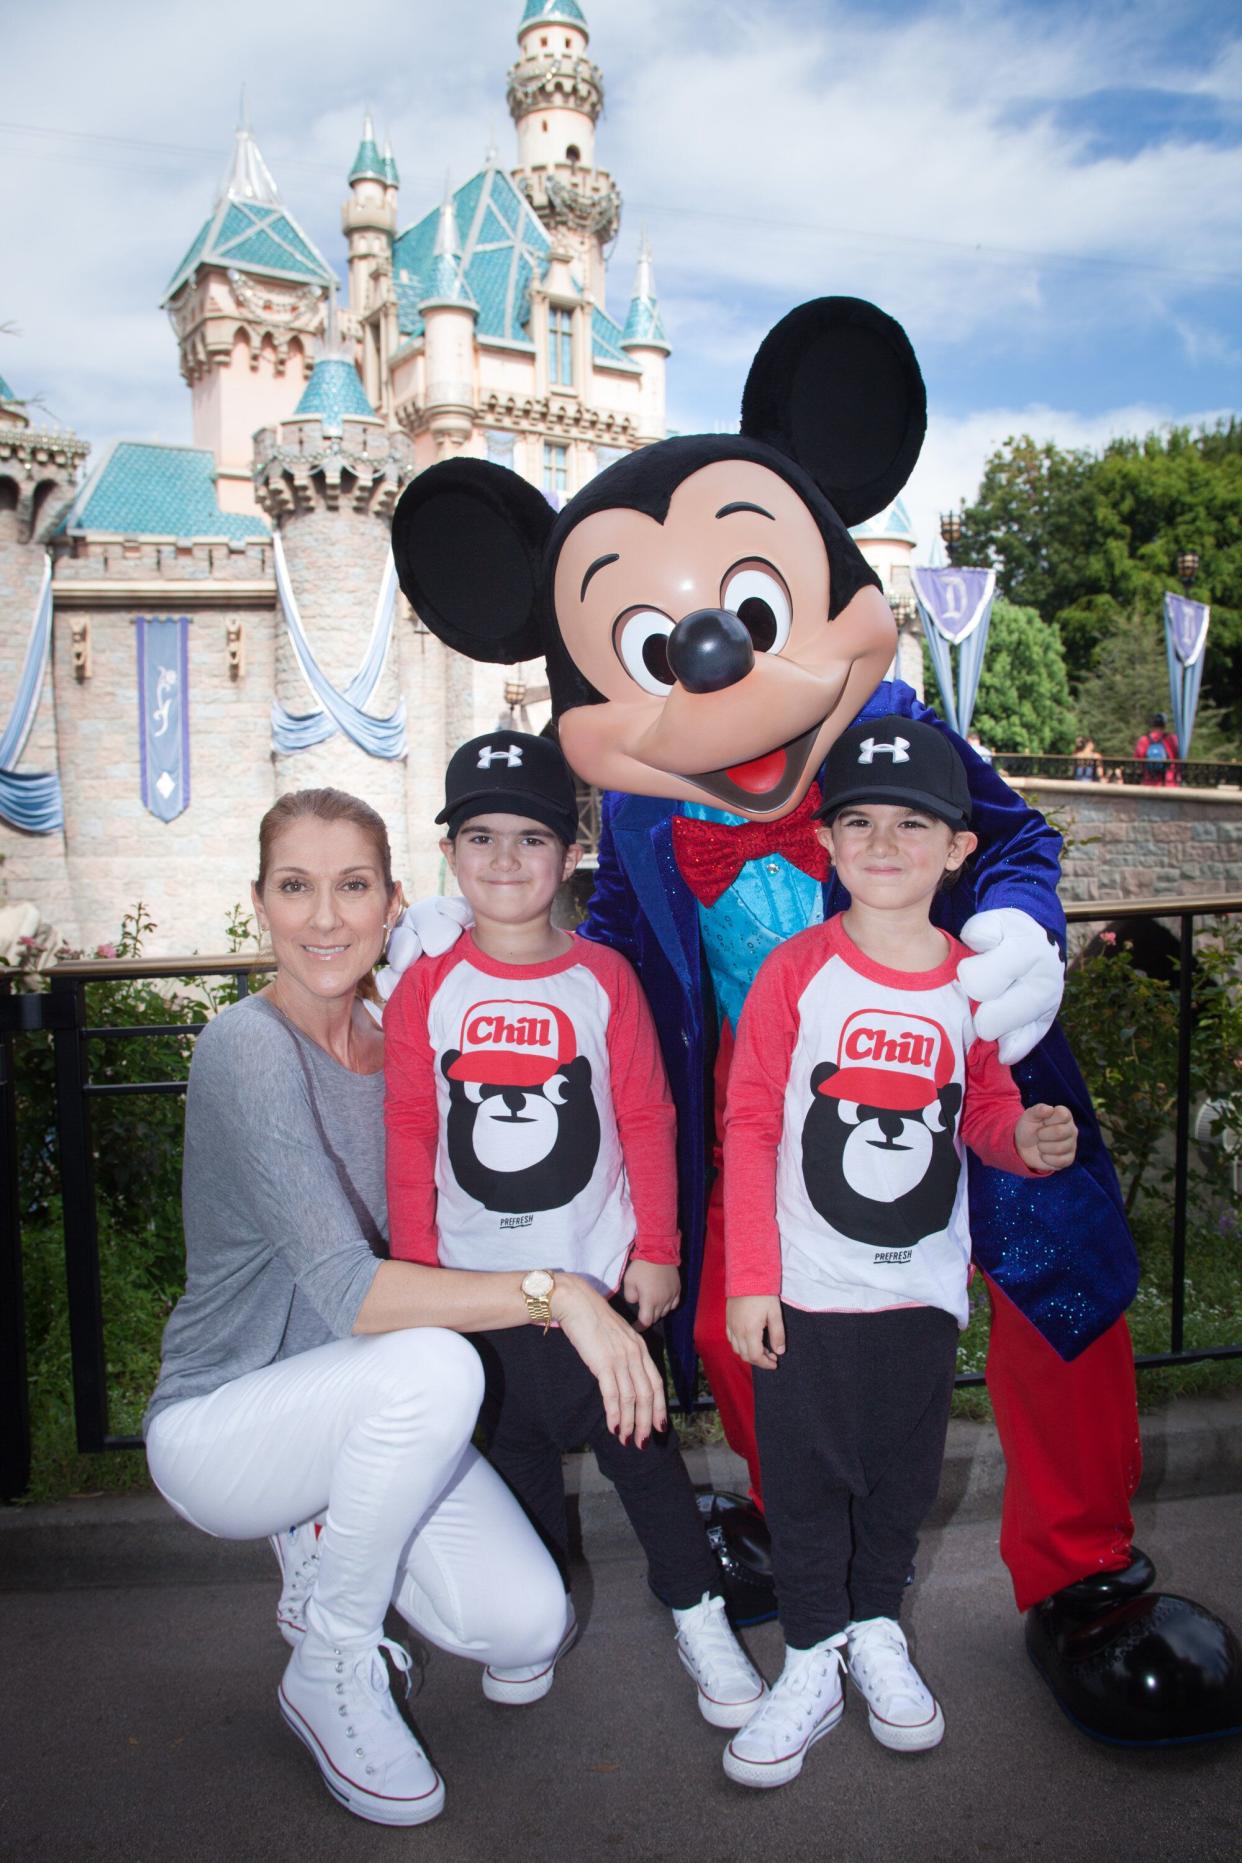 Celine Dion and twin sons Eddy and Nelson celebrate the boys' fifth birthday with Mickey Mouse at Disneyland in Anaheim, California, in October 2015. (Photo: Handout via Getty Images)